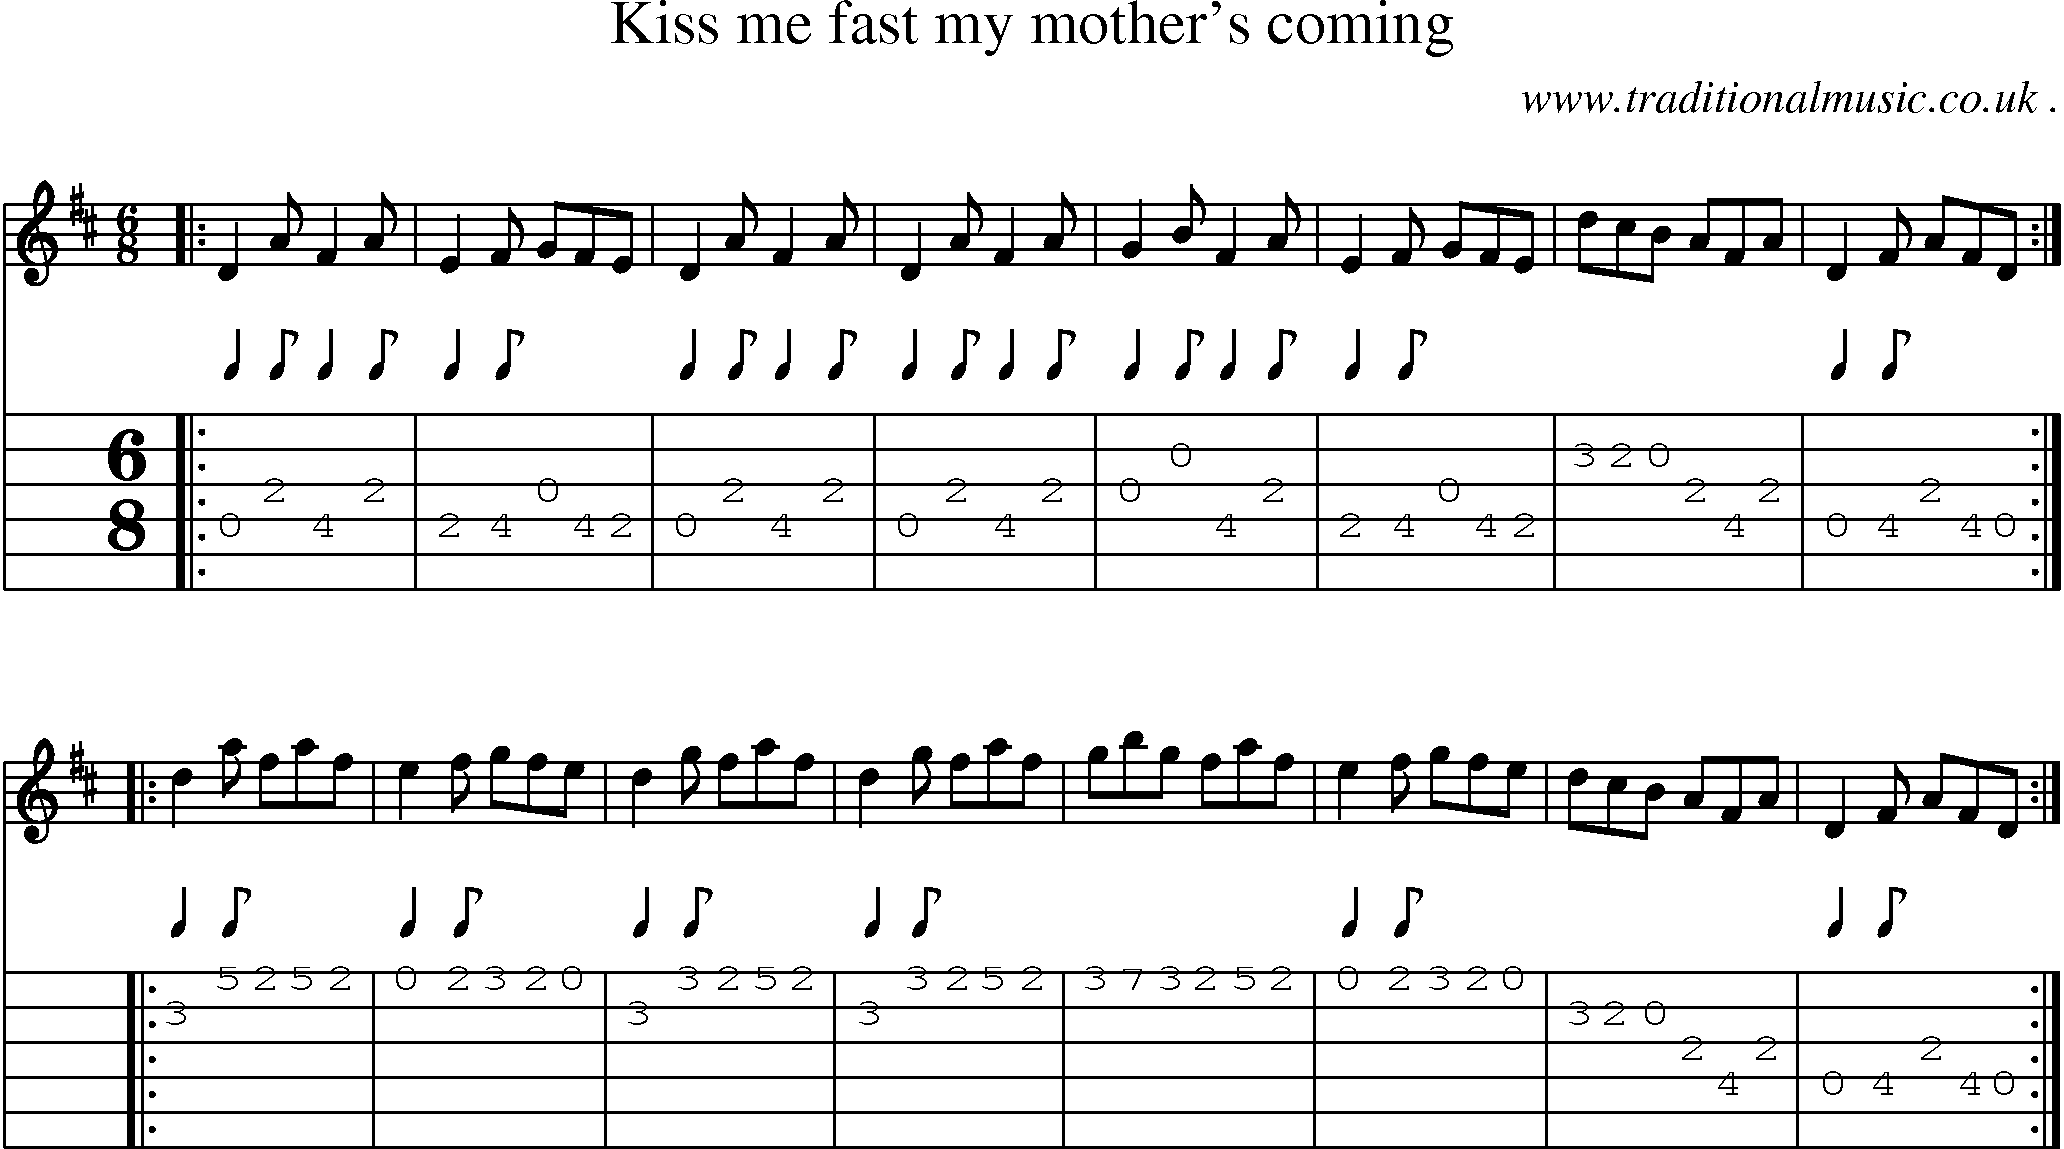 Sheet-music  score, Chords and Guitar Tabs for Kiss Me Fast My Mothers Coming